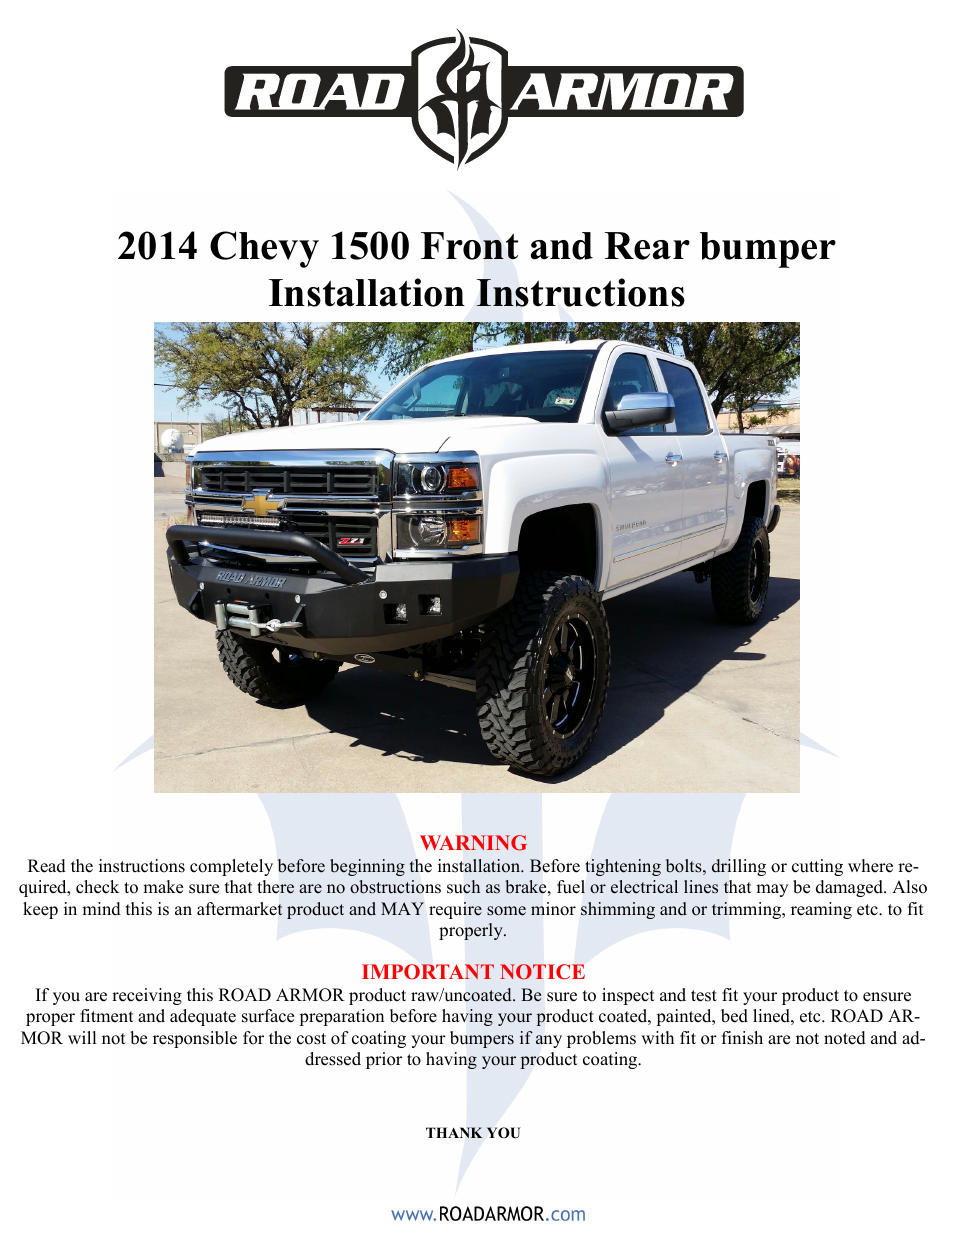 2014 Chevy 1500 Front Bumper